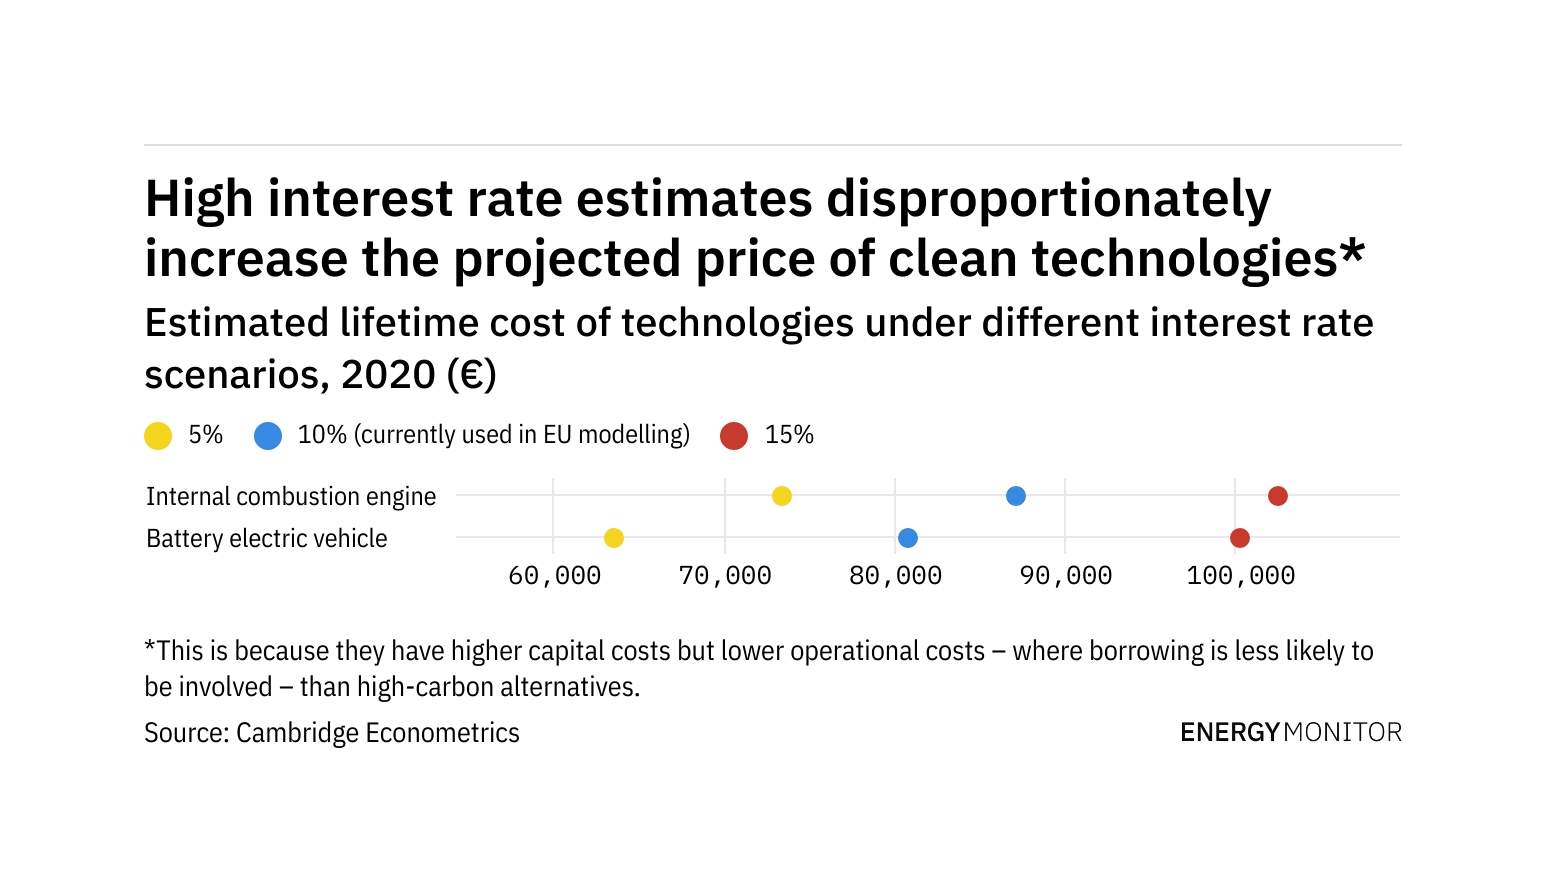 Weekly data: Interest rate modelling risks overestimating decarbonising costs